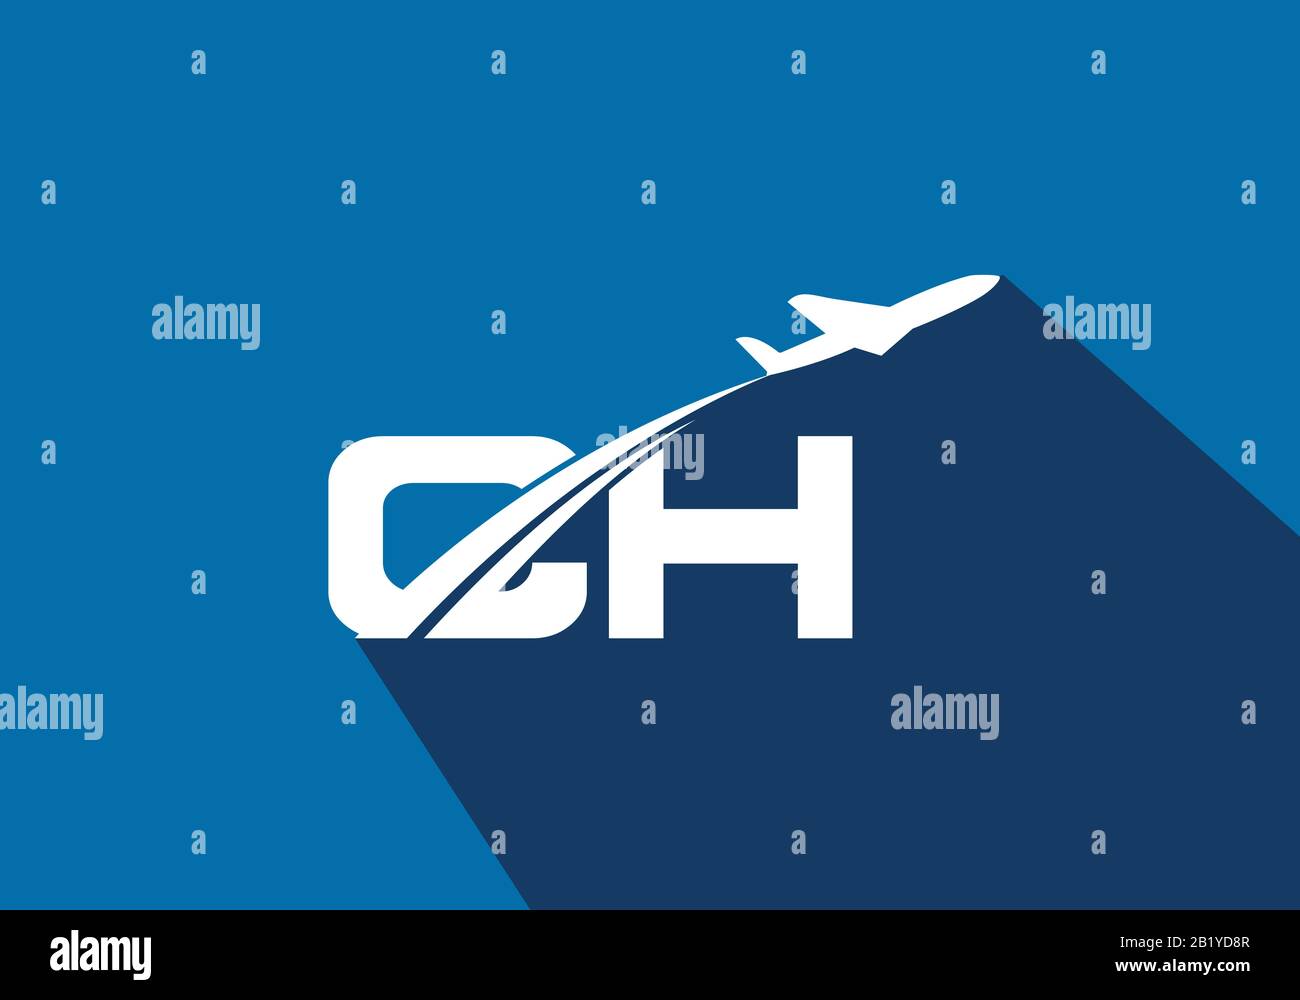 Initial Letter C and H  with Aviation Logo Design, Air, Airline, Airplane and Travel Logo template. Stock Vector